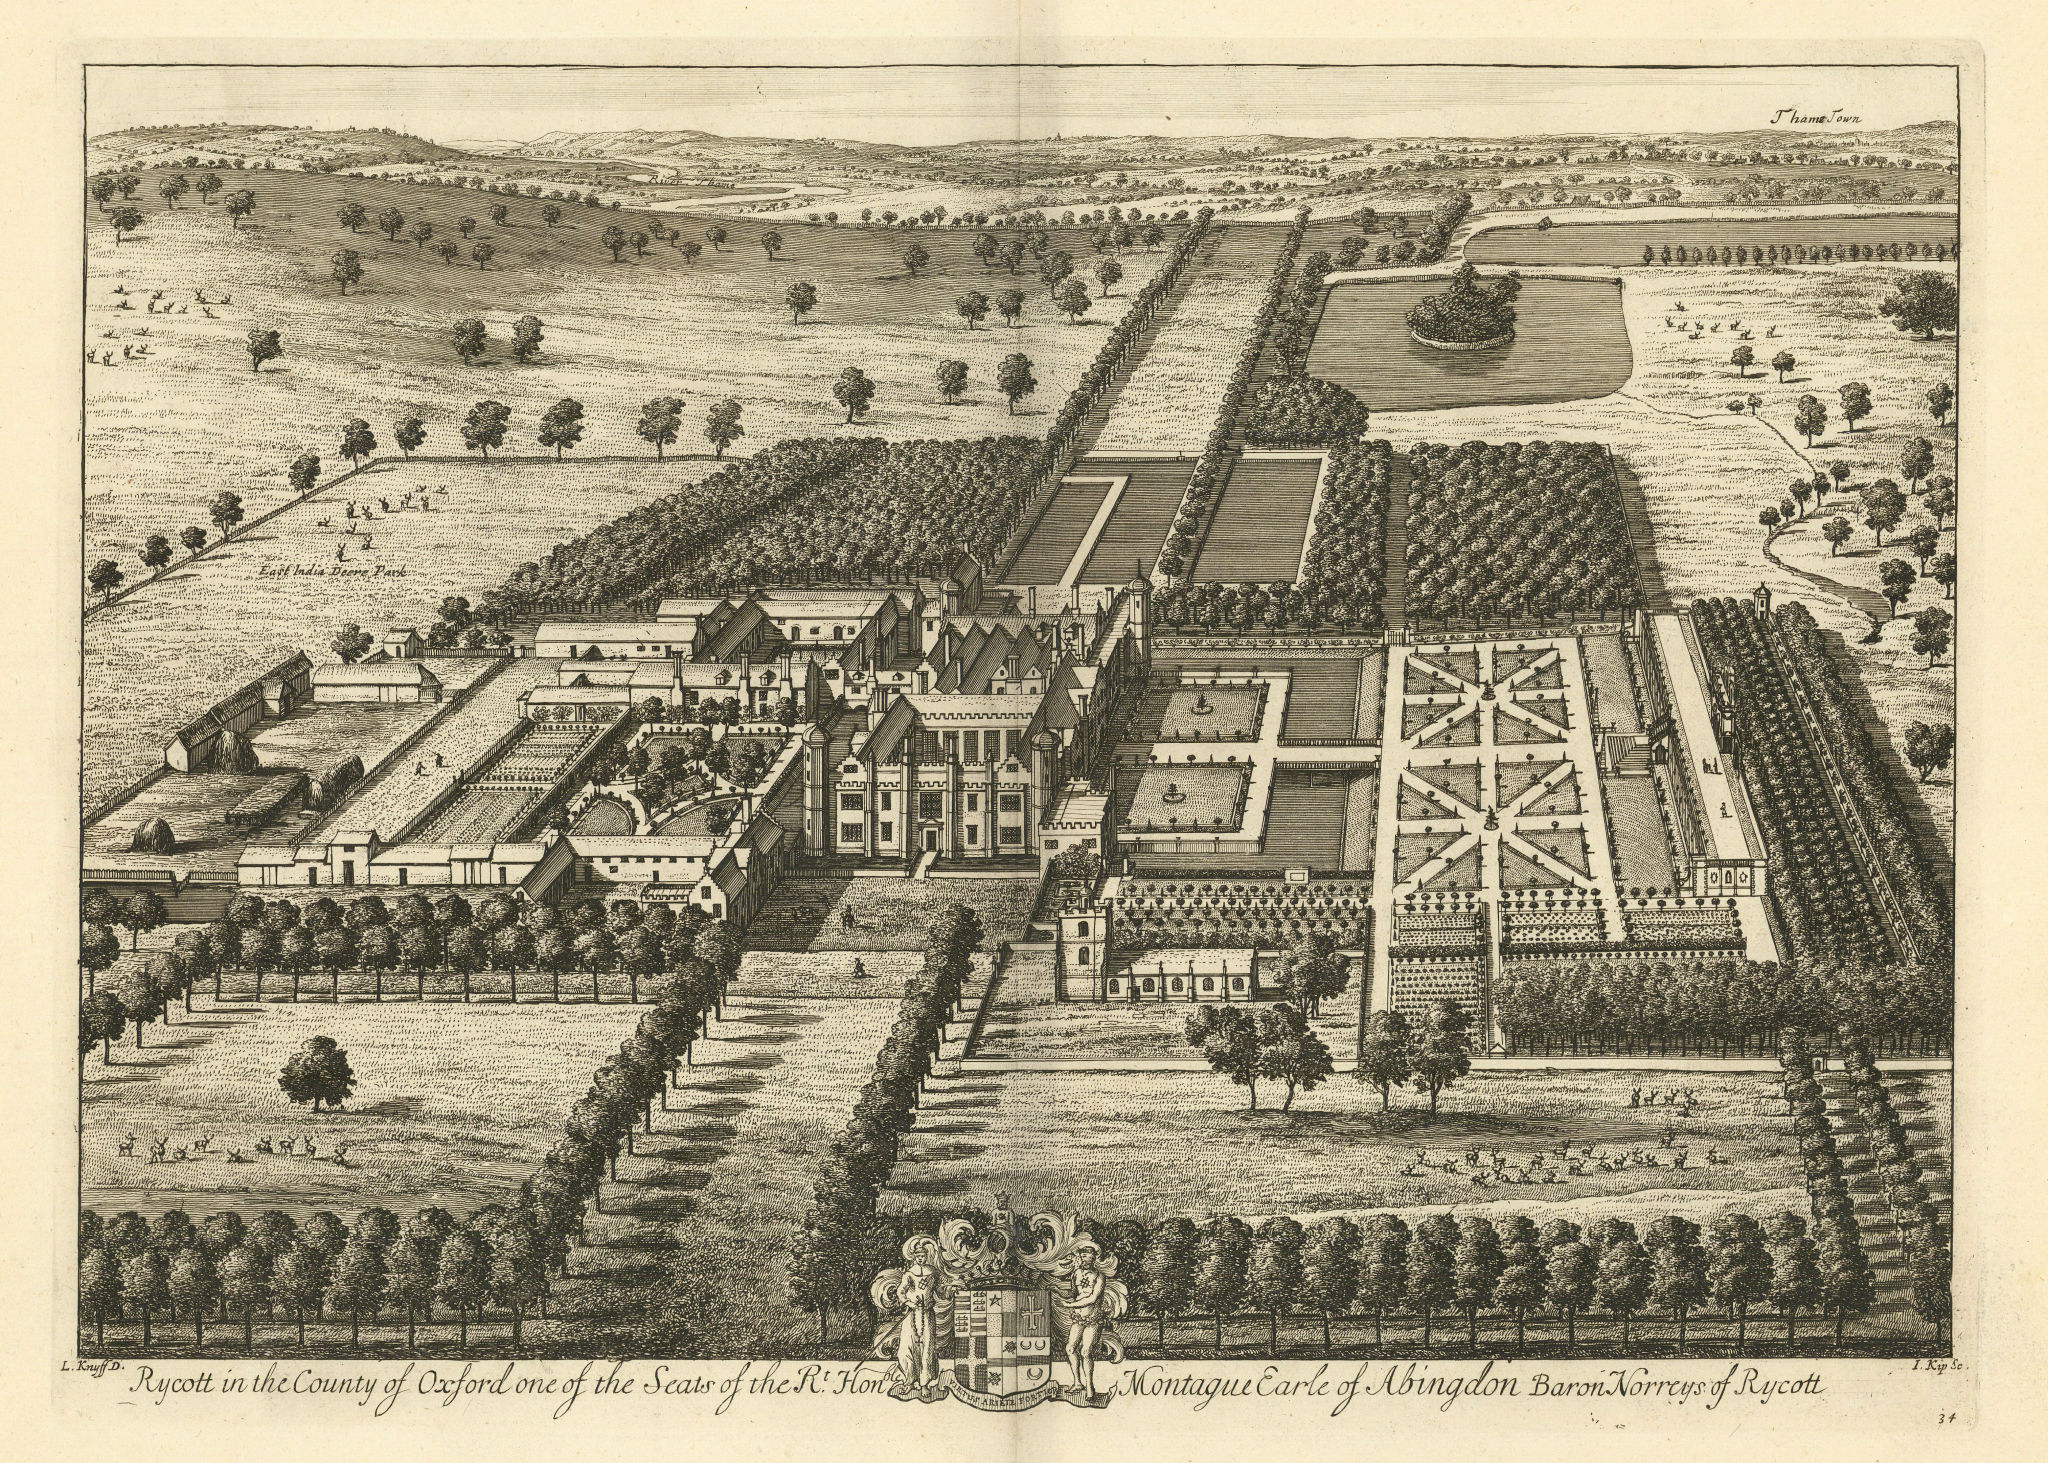 Rycote House, Oxfordshire by Kip & Knyff. "Rycott in the County of Oxford" 1709